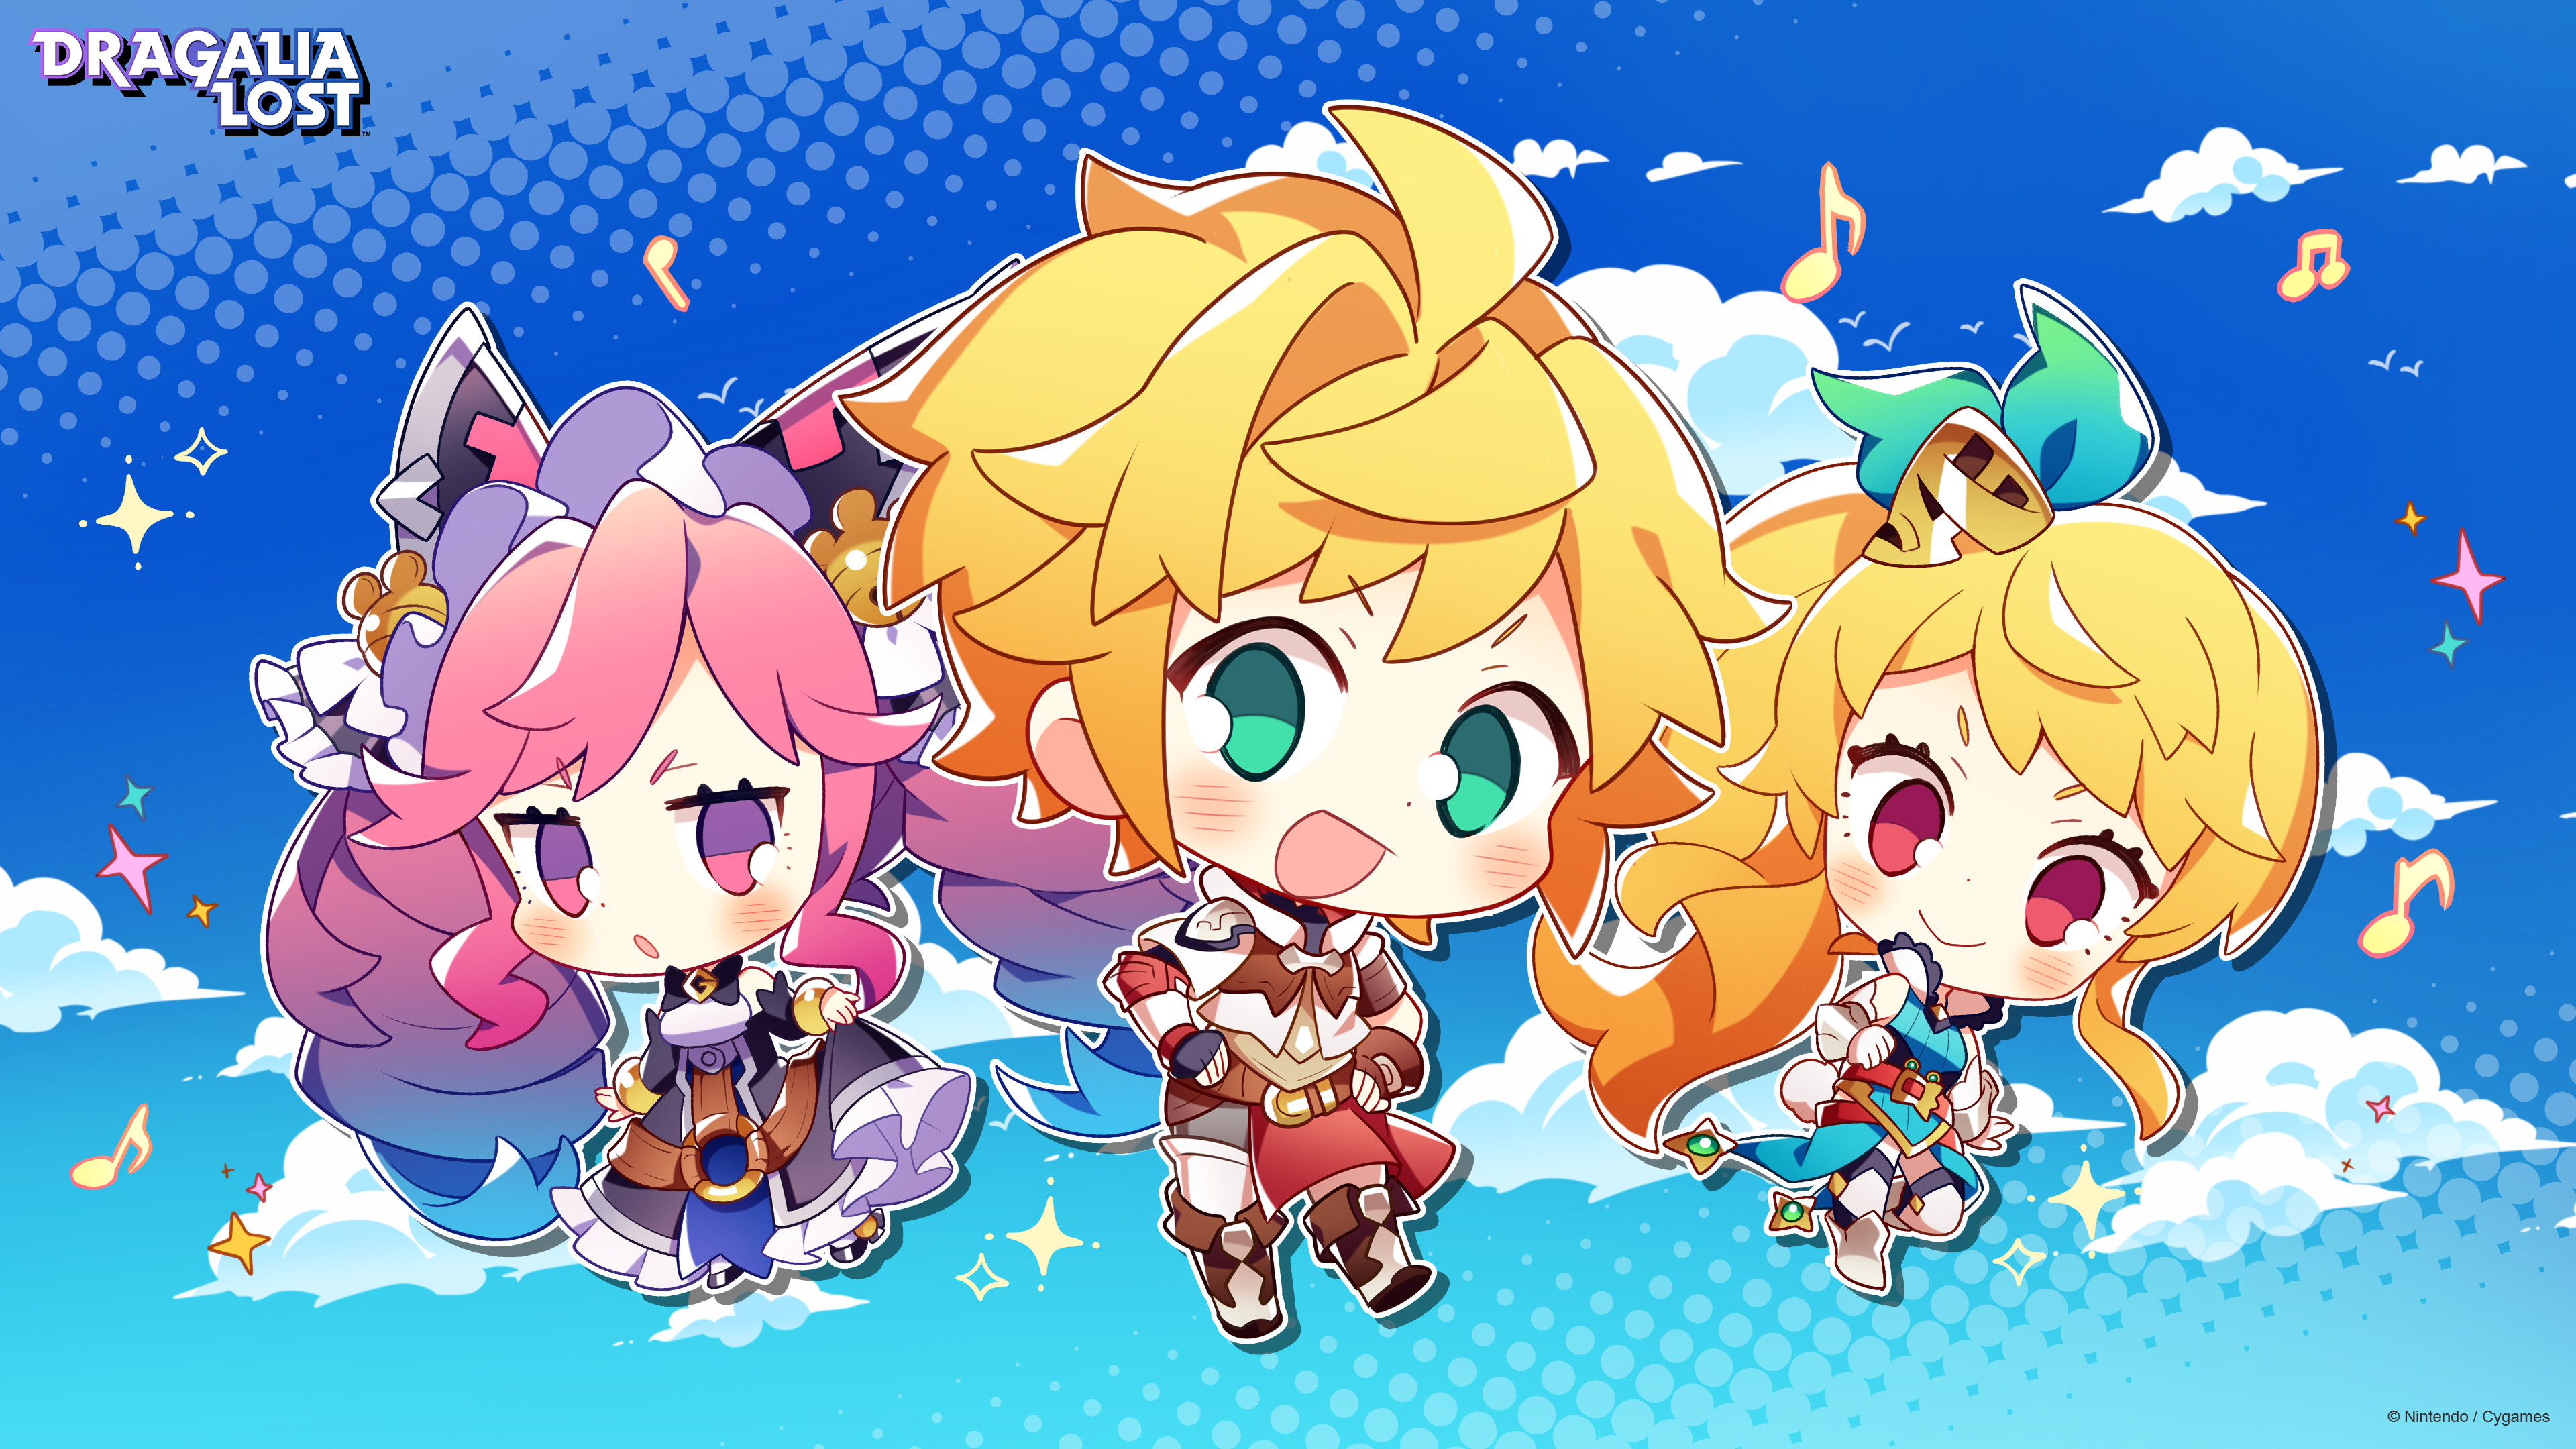 Video Game Dragalia Lost HD Wallpaper | Background Image